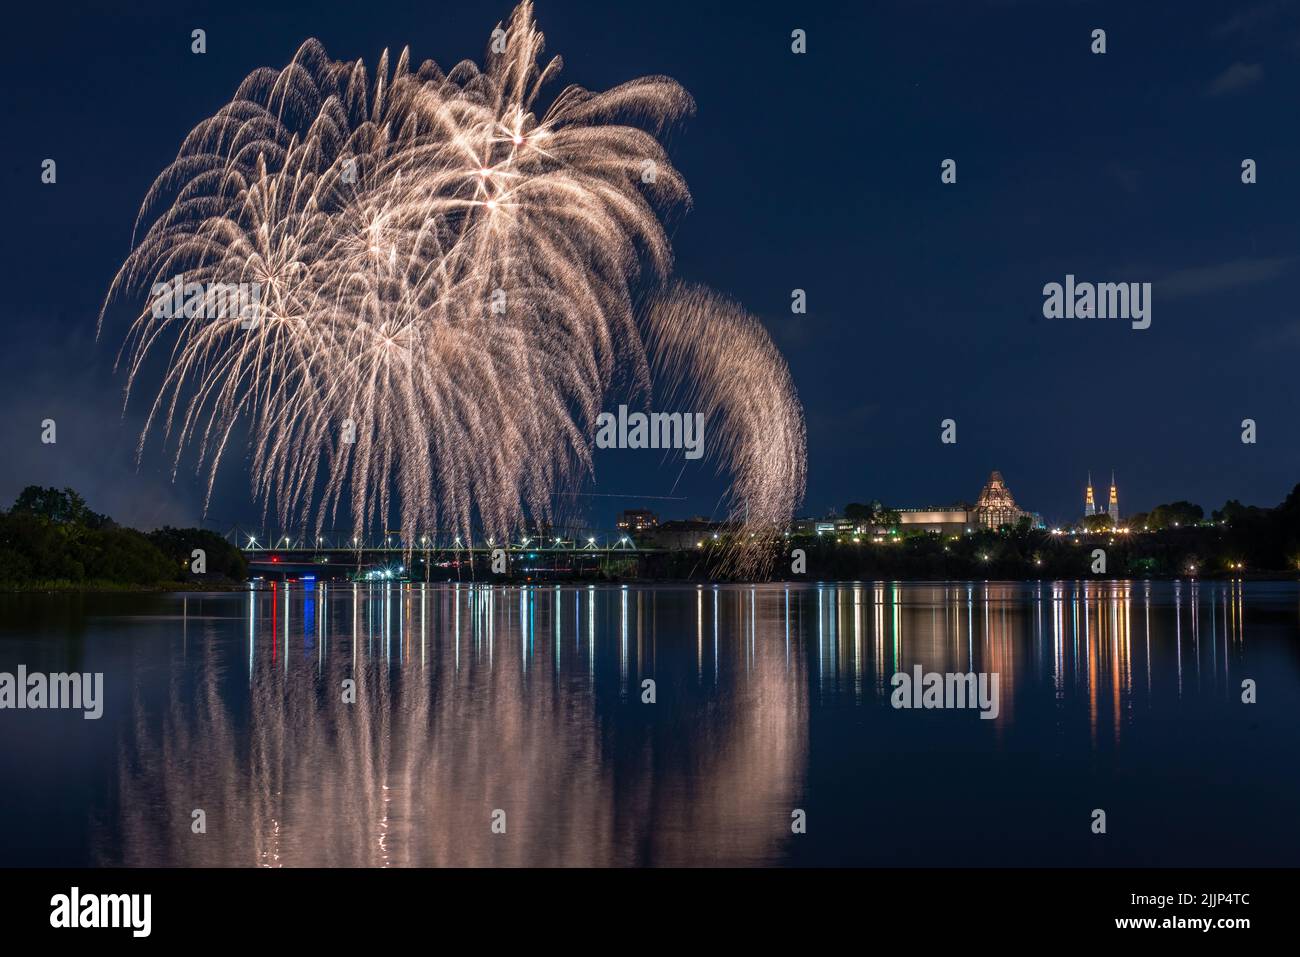 A beautiful view of fireworks in the night sky over the lake by the city Stock Photo